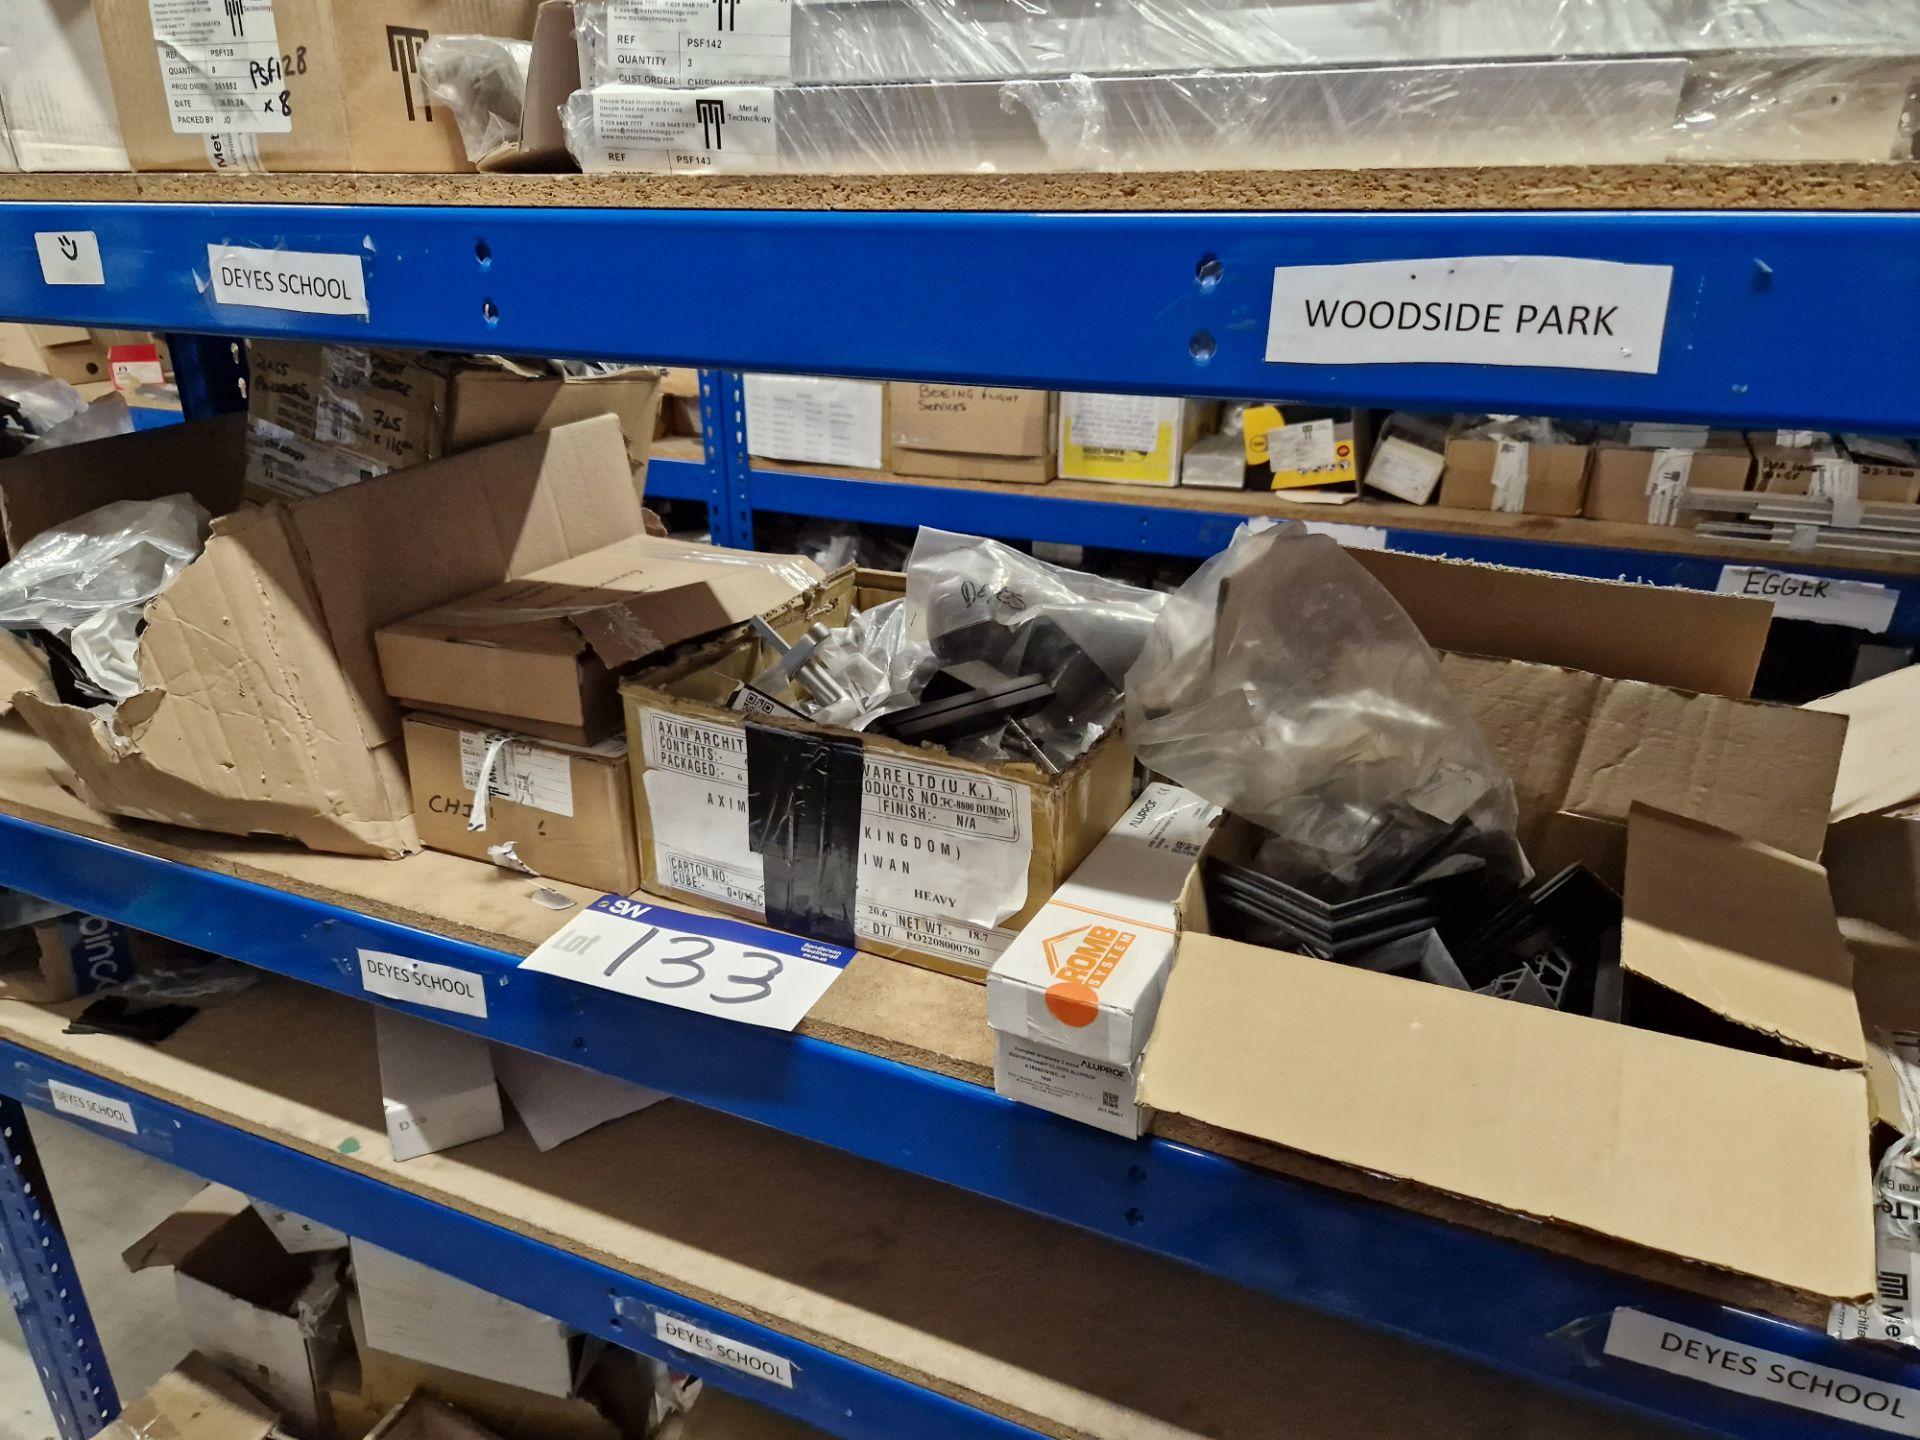 Contents to Two Bays of Shelving, including Rubber Gaskets, Aluminium Profile, End Caps, Screws, - Image 3 of 8